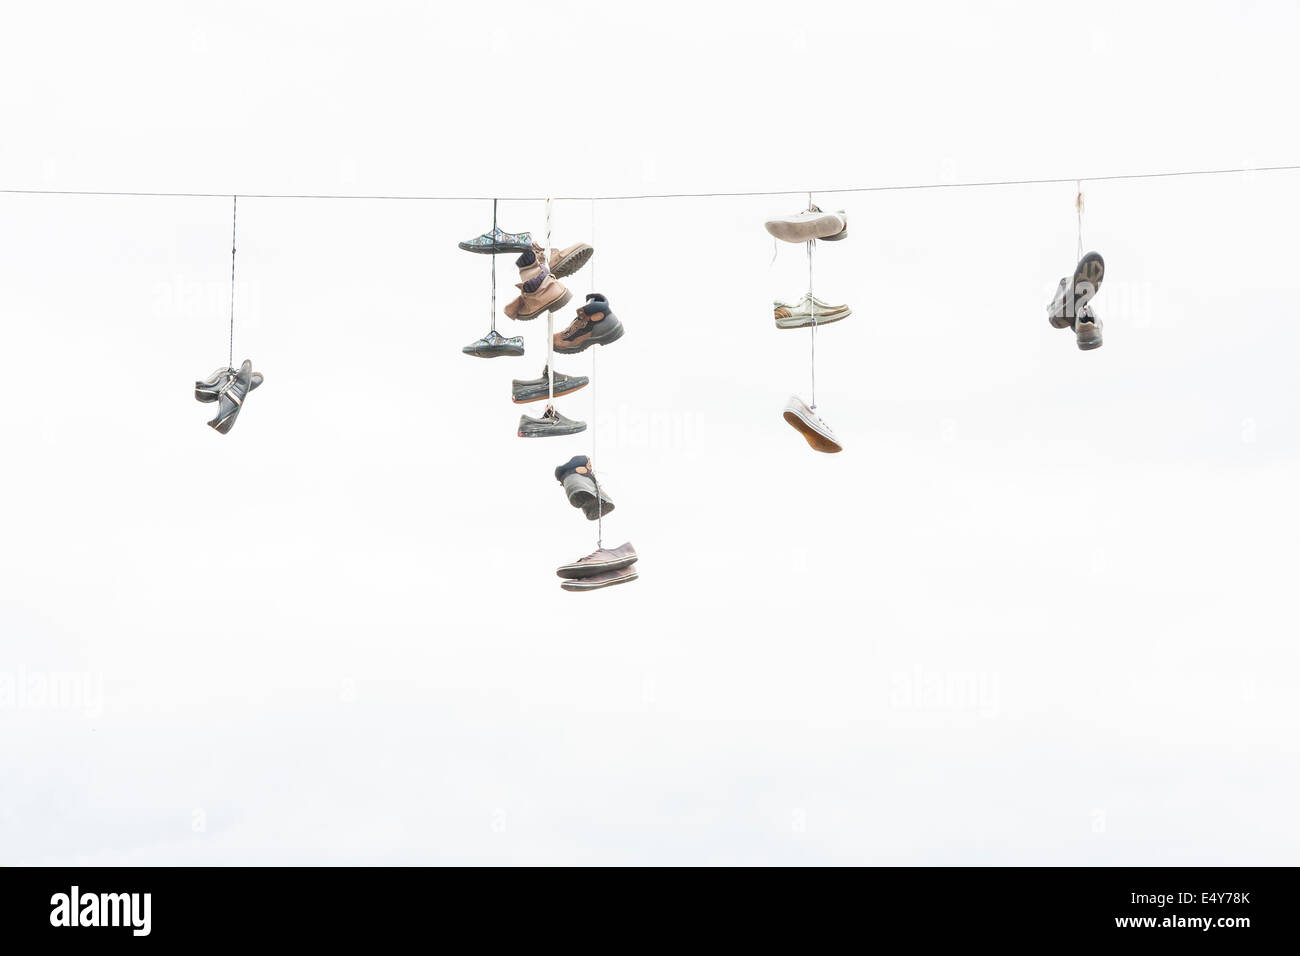 Many old worn boots or shoes hang on an electric cable Stock Photo